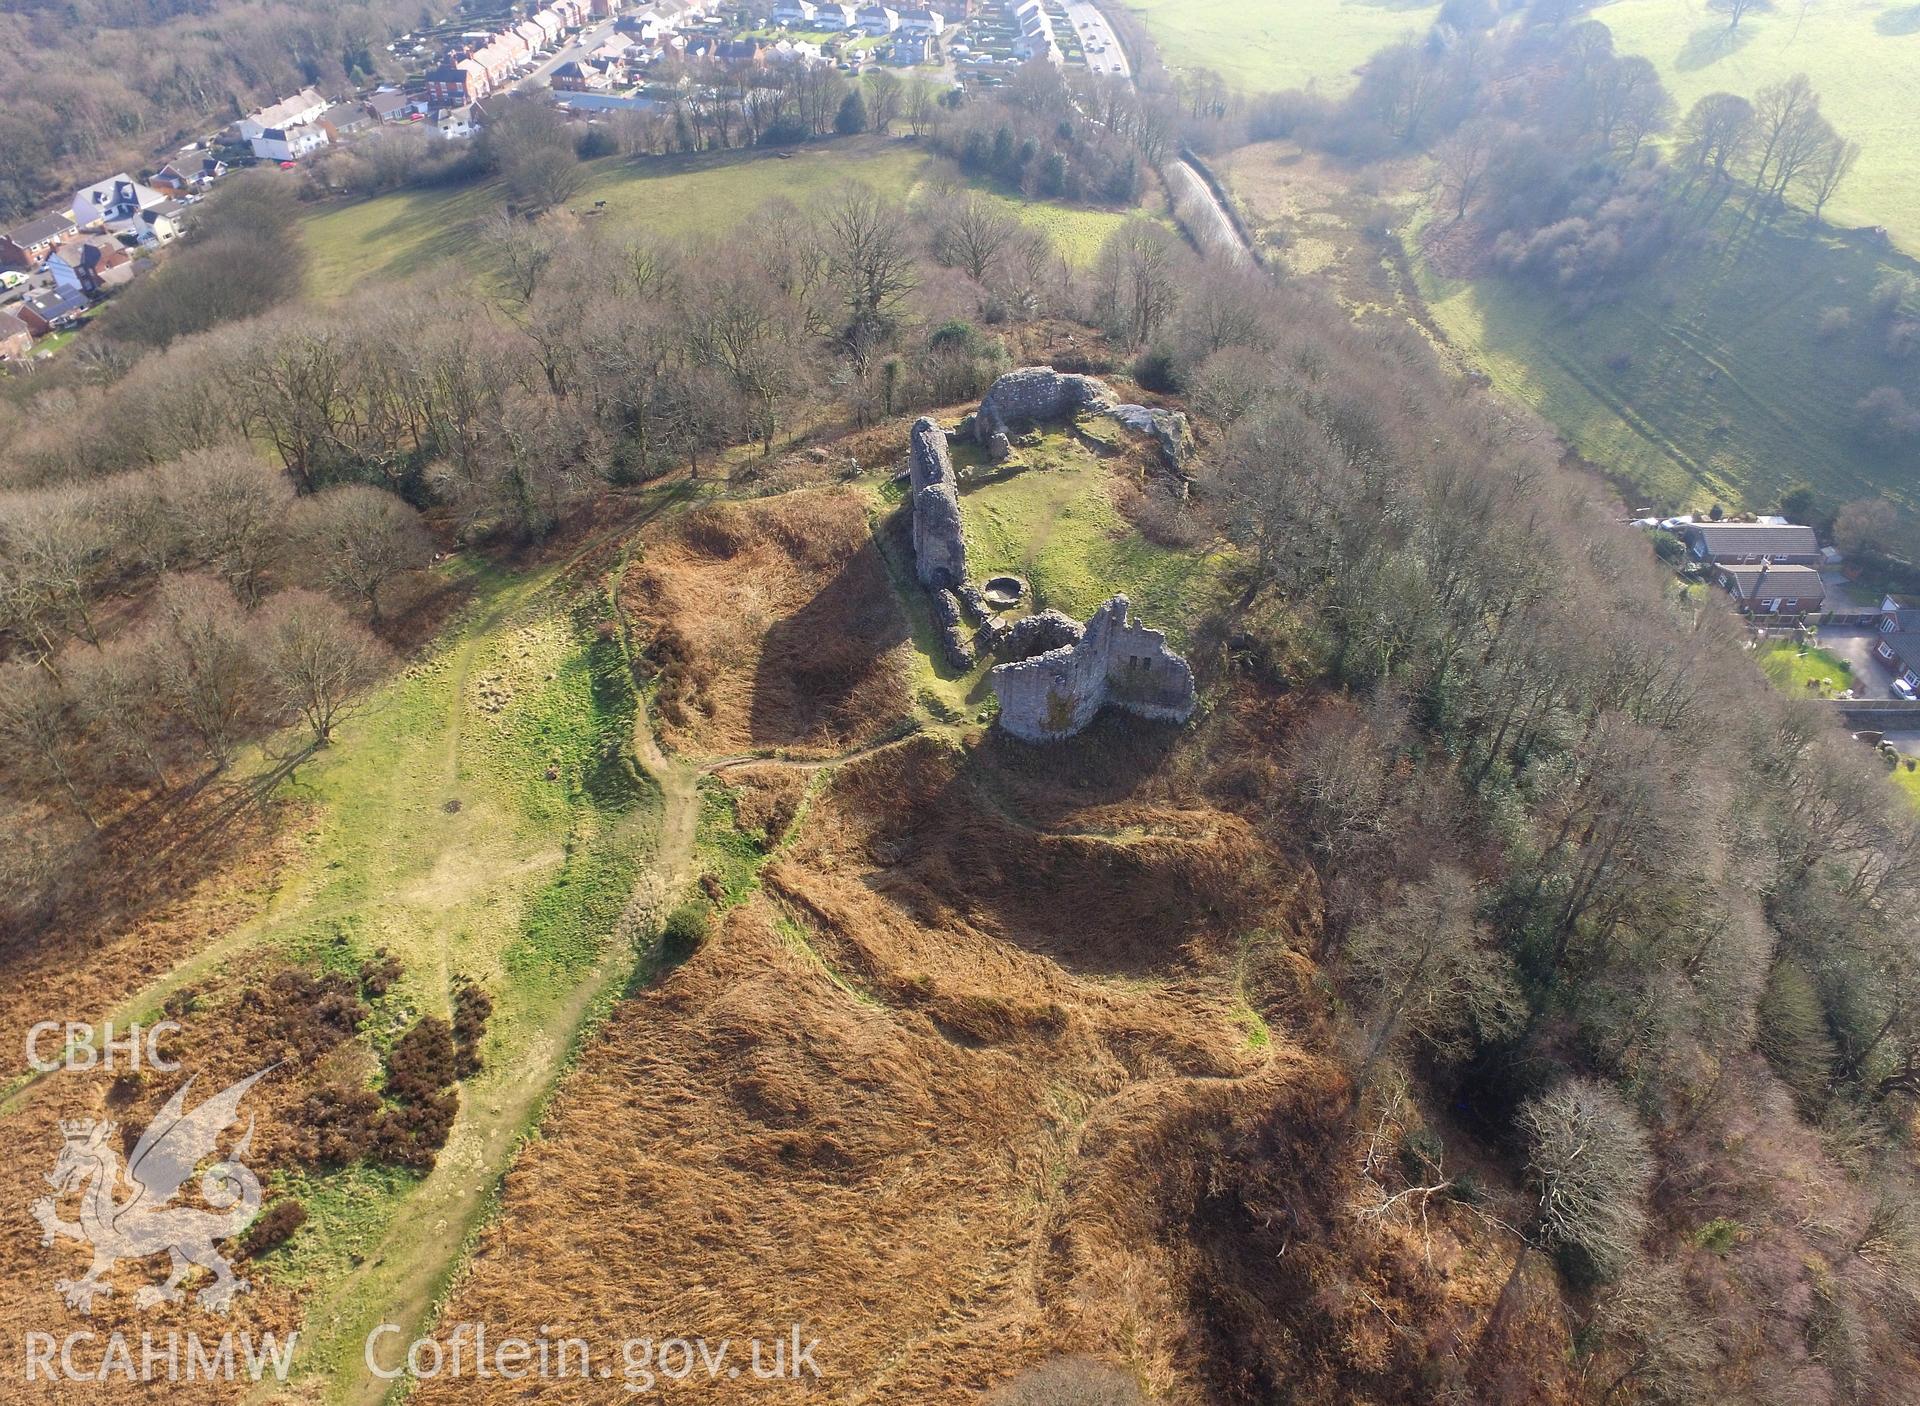 Colour photo showing view of Caergwrle, taken by Paul R. Davis, 9th March 2018.